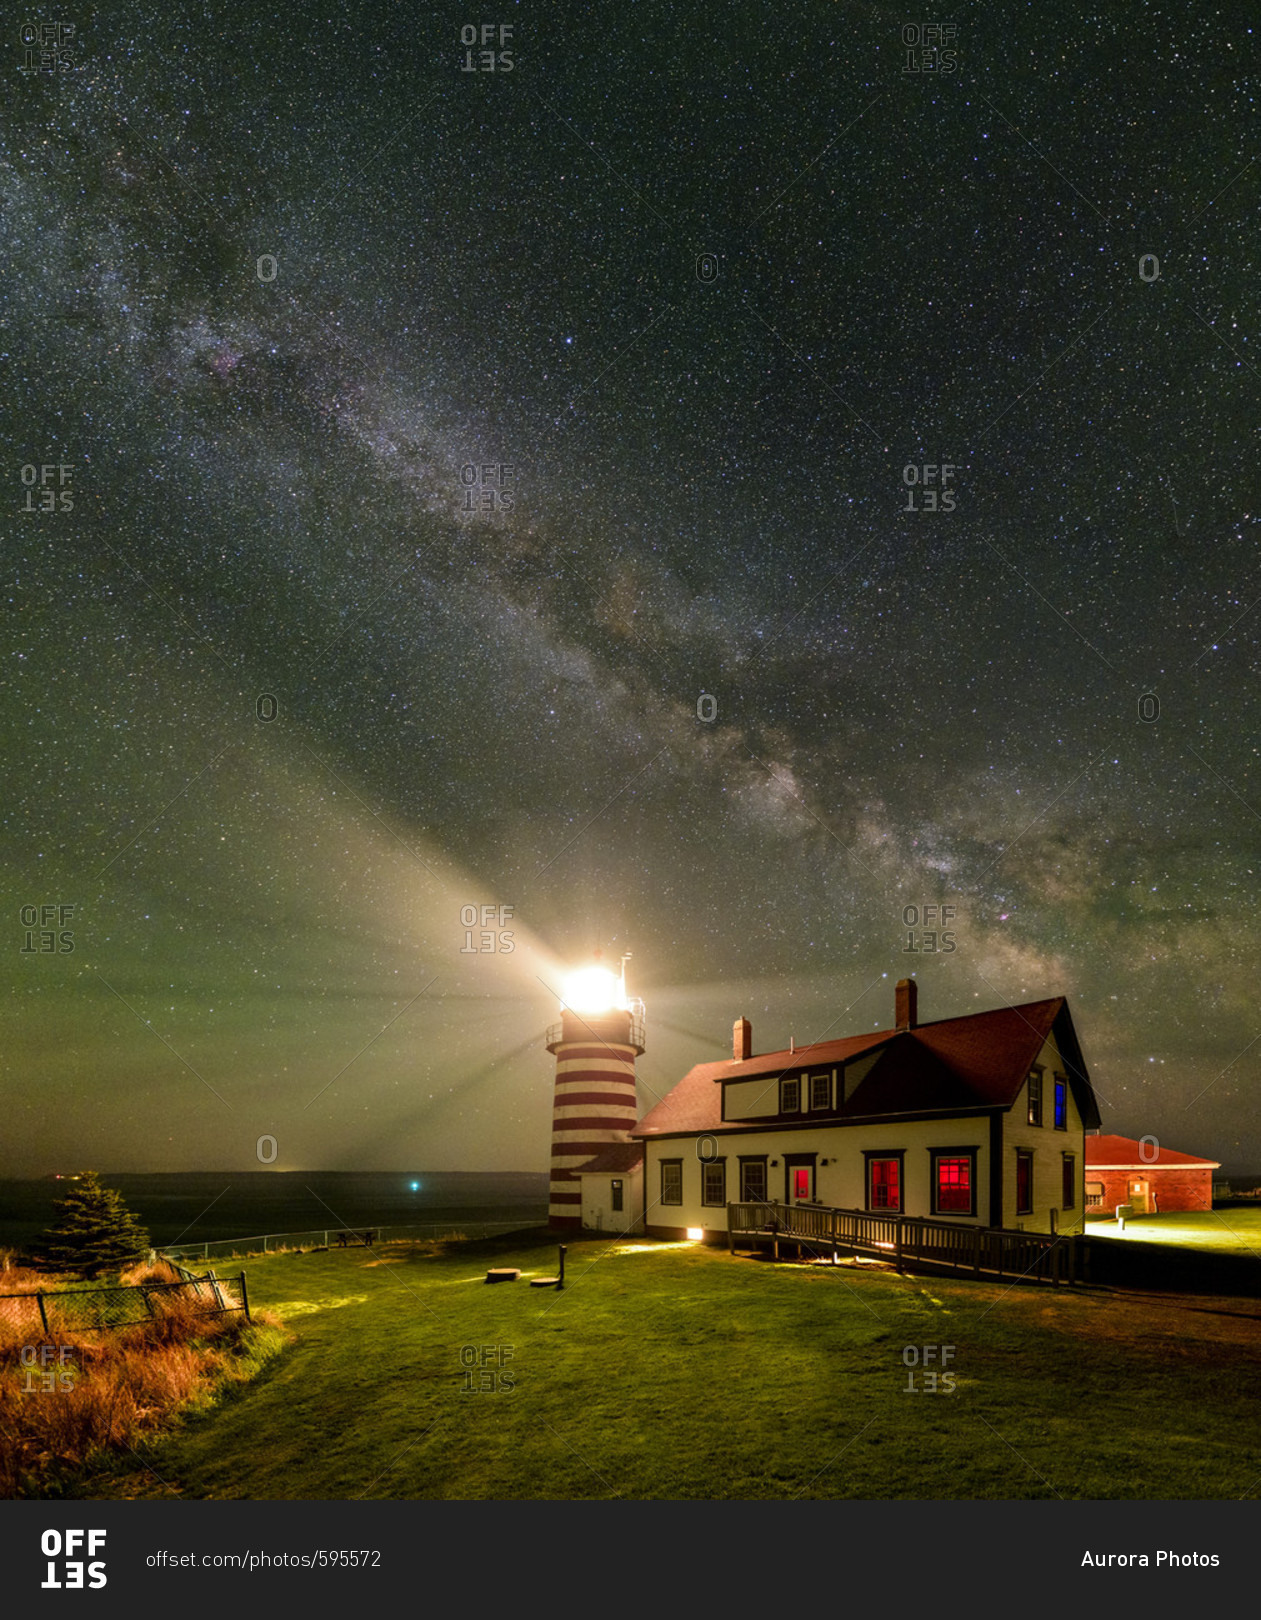 A vertical panorama of the Milky Way over West Quoddy Head Lighthouse in Maine.